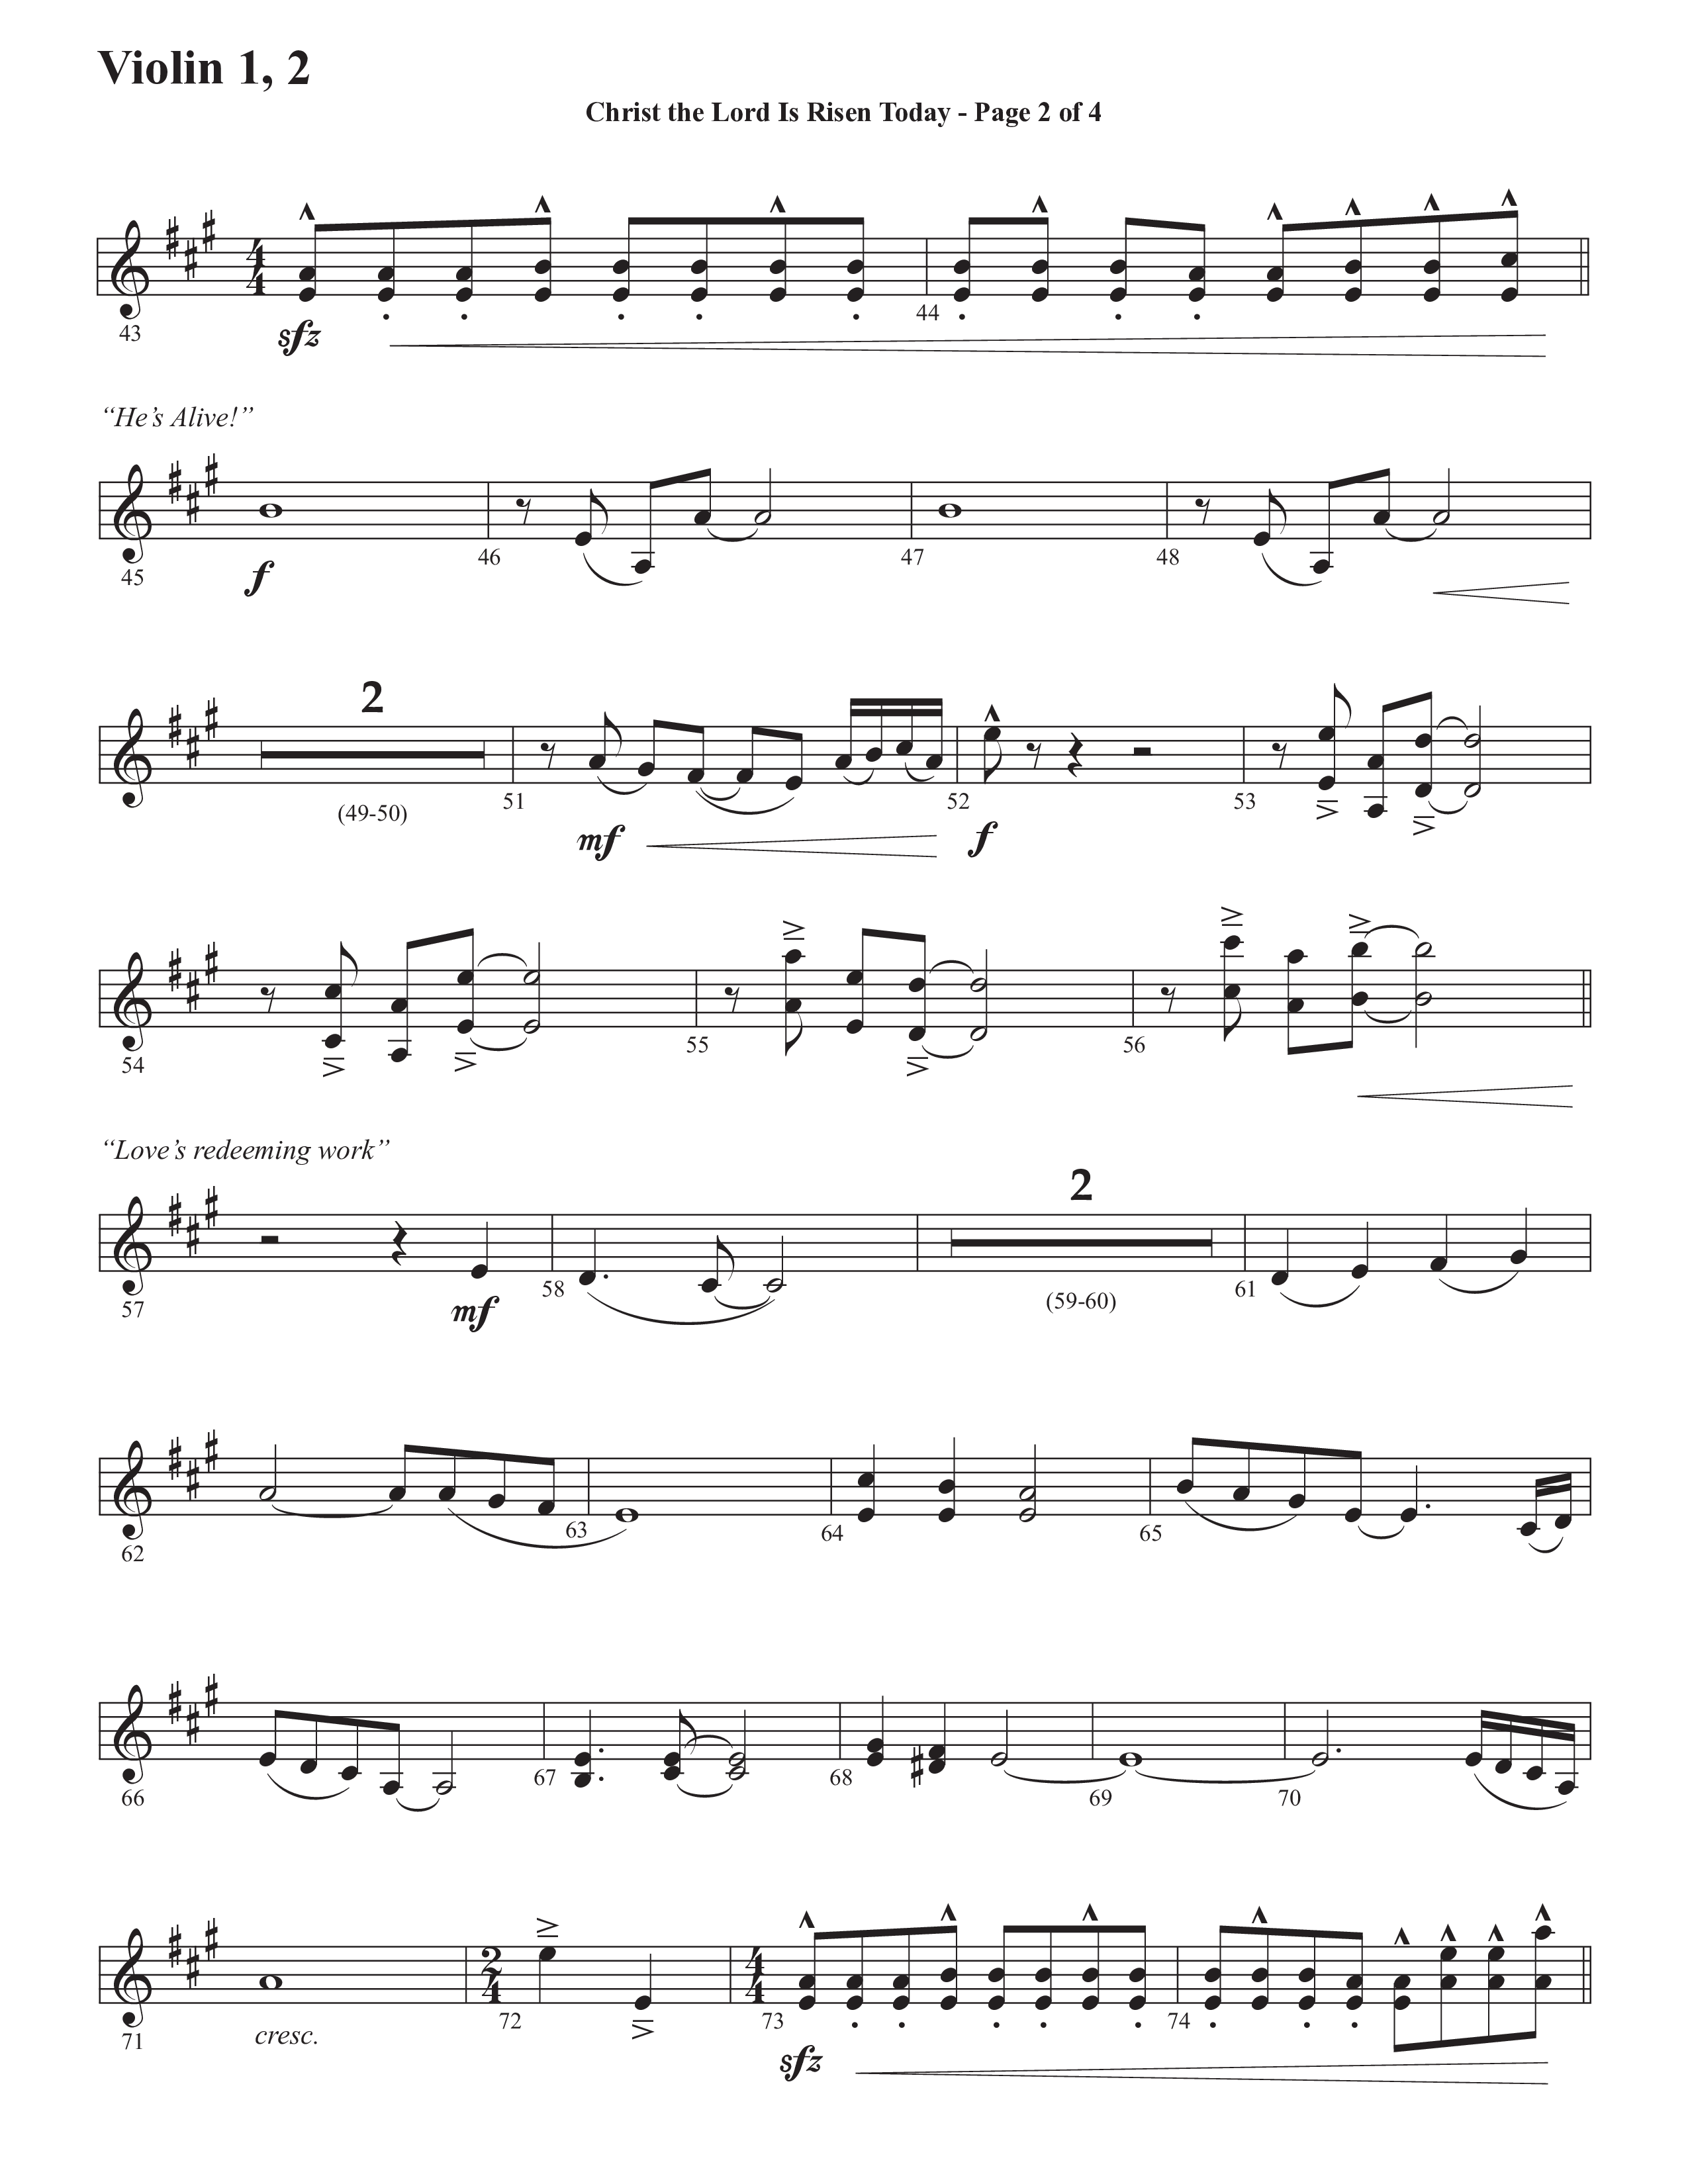 Christ The Lord Is Risen Today (He's Alive) (Choral Anthem SATB) Violin 1/2 (Semsen Music / Arr. John Bolin / Orch. Cliff Duren)